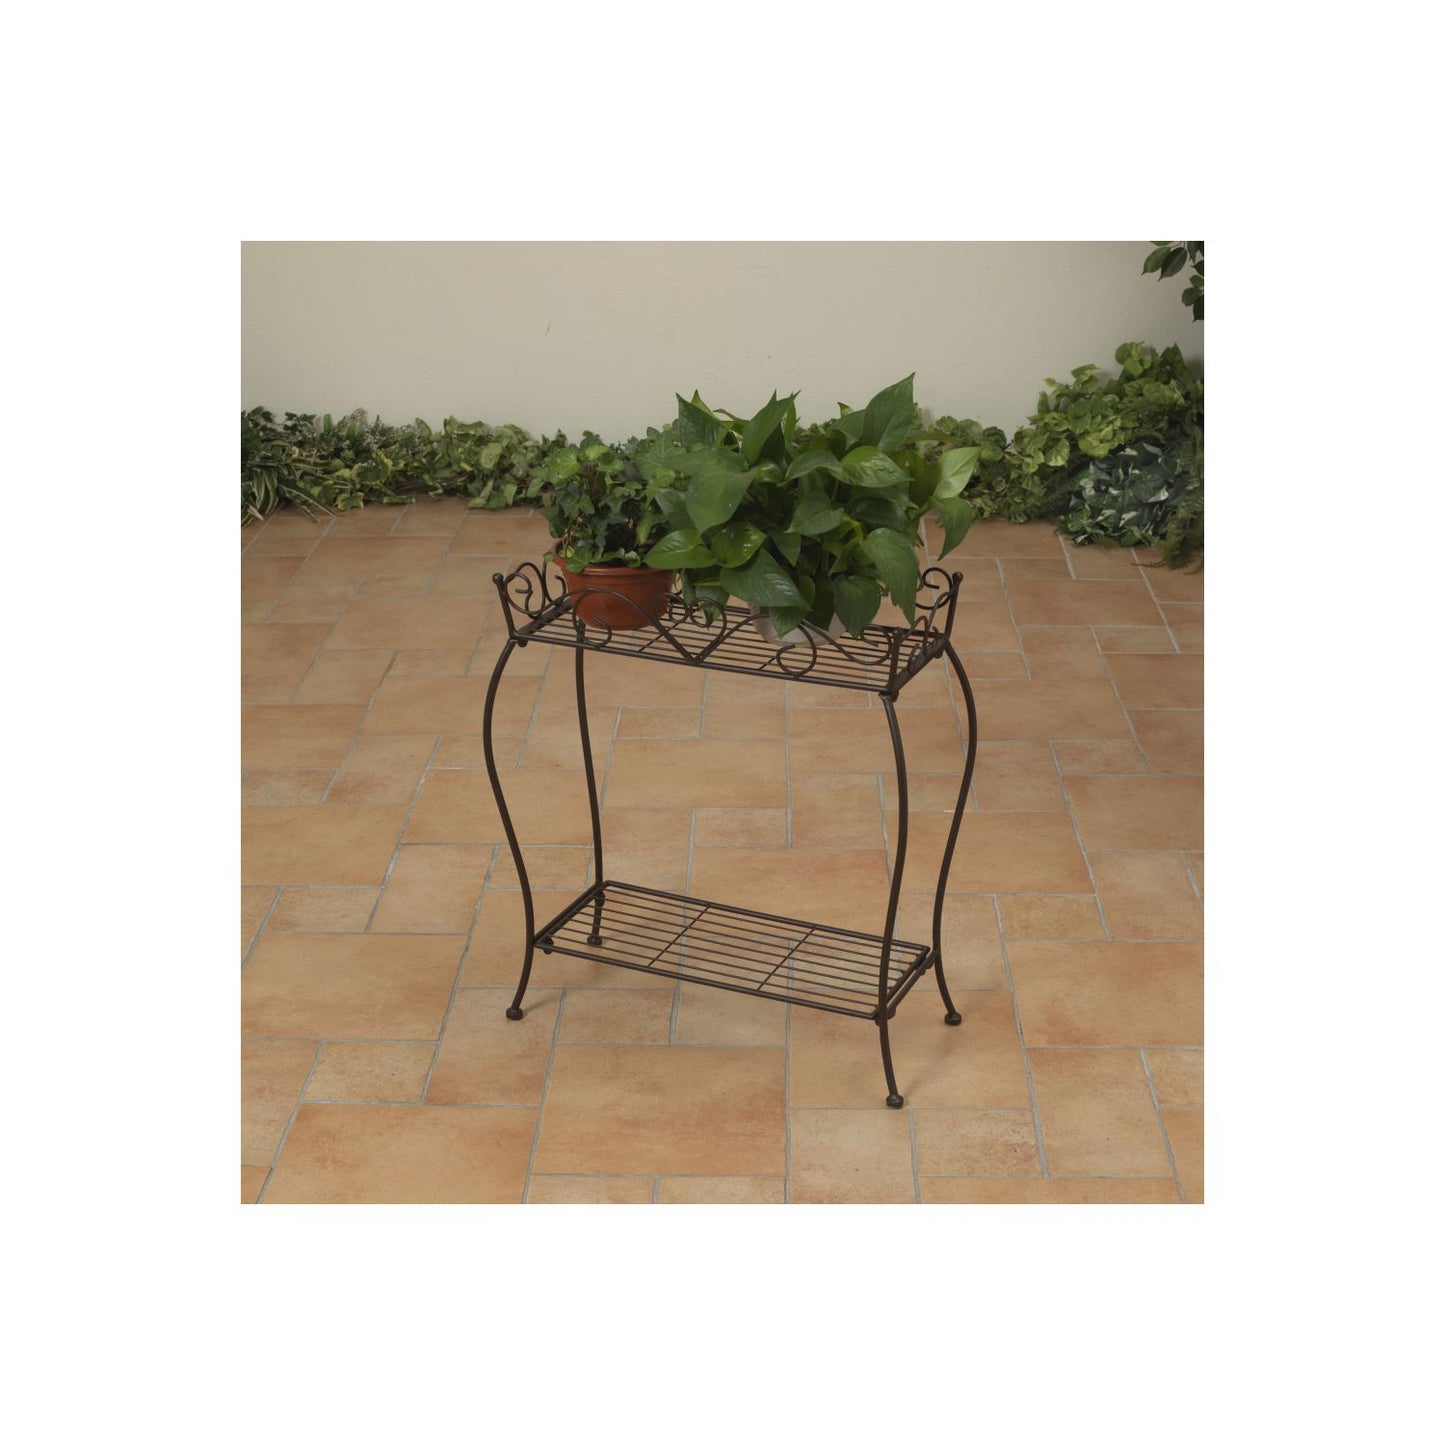 Gerson Company 24.41"H Metal Plant Stand, Ships K/D